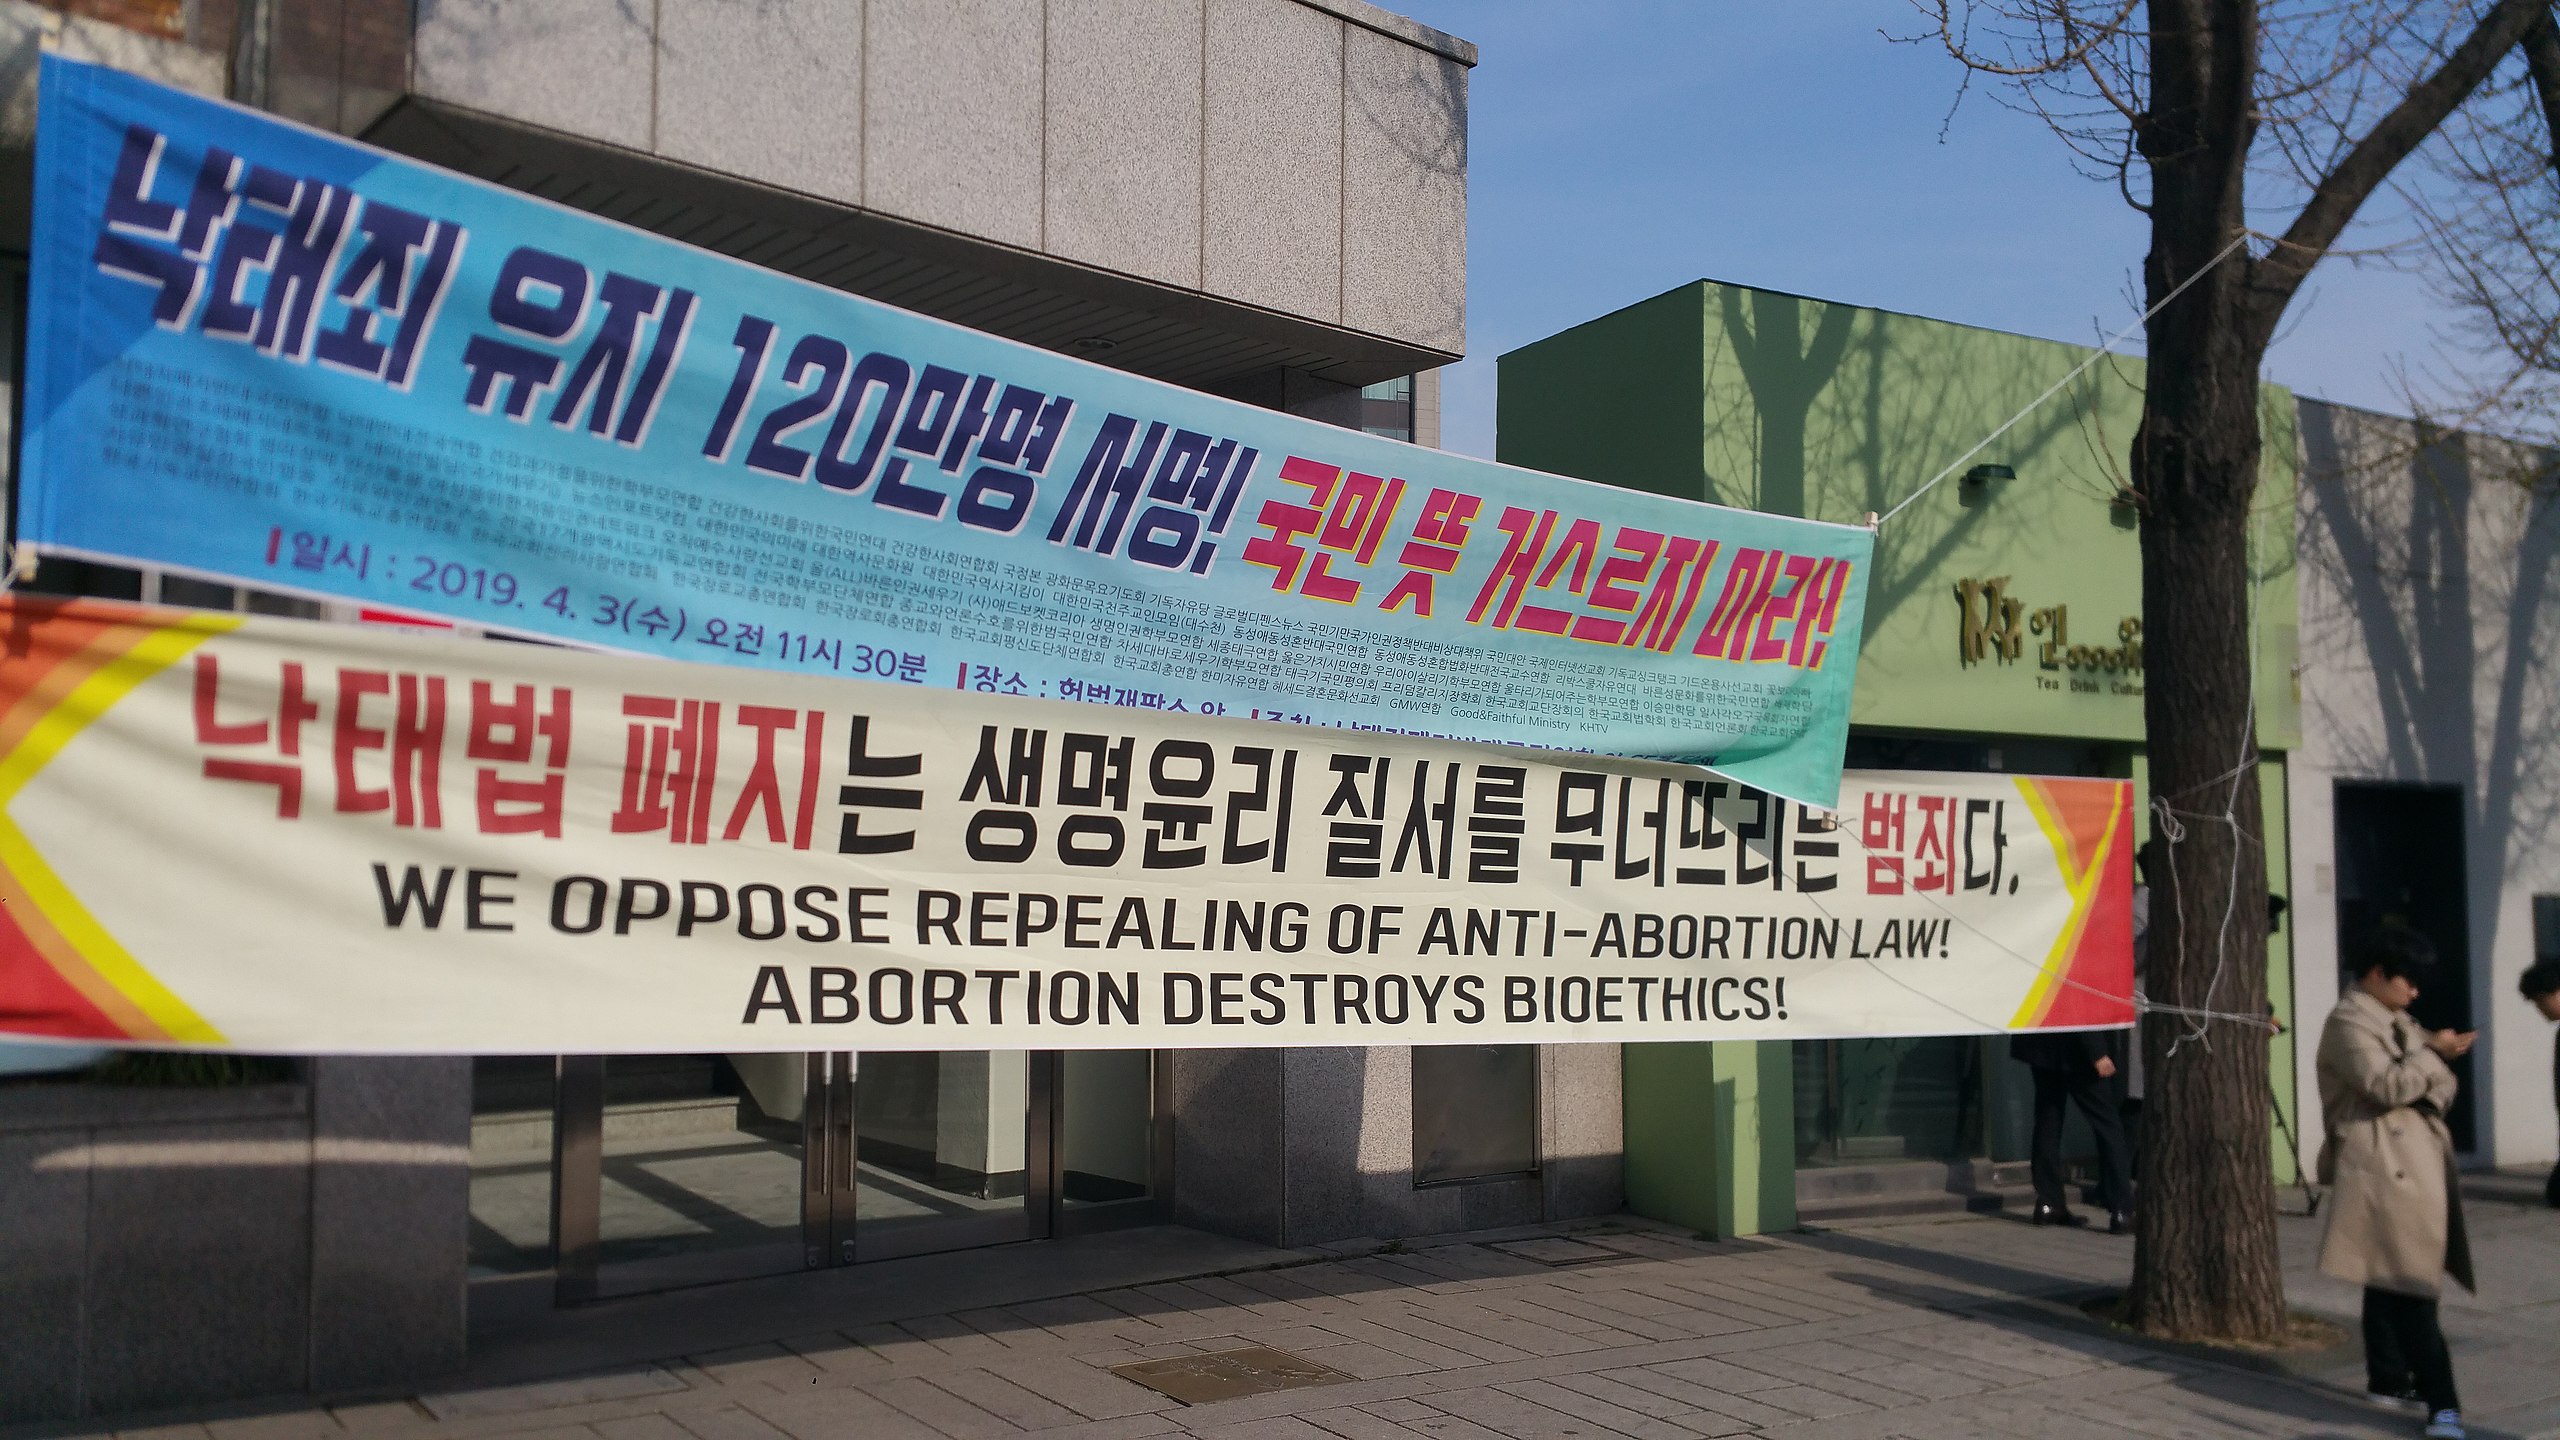 Banners in South Korea marking the Constitutional Court of Korea decision to decriminalize abortion, 2019.